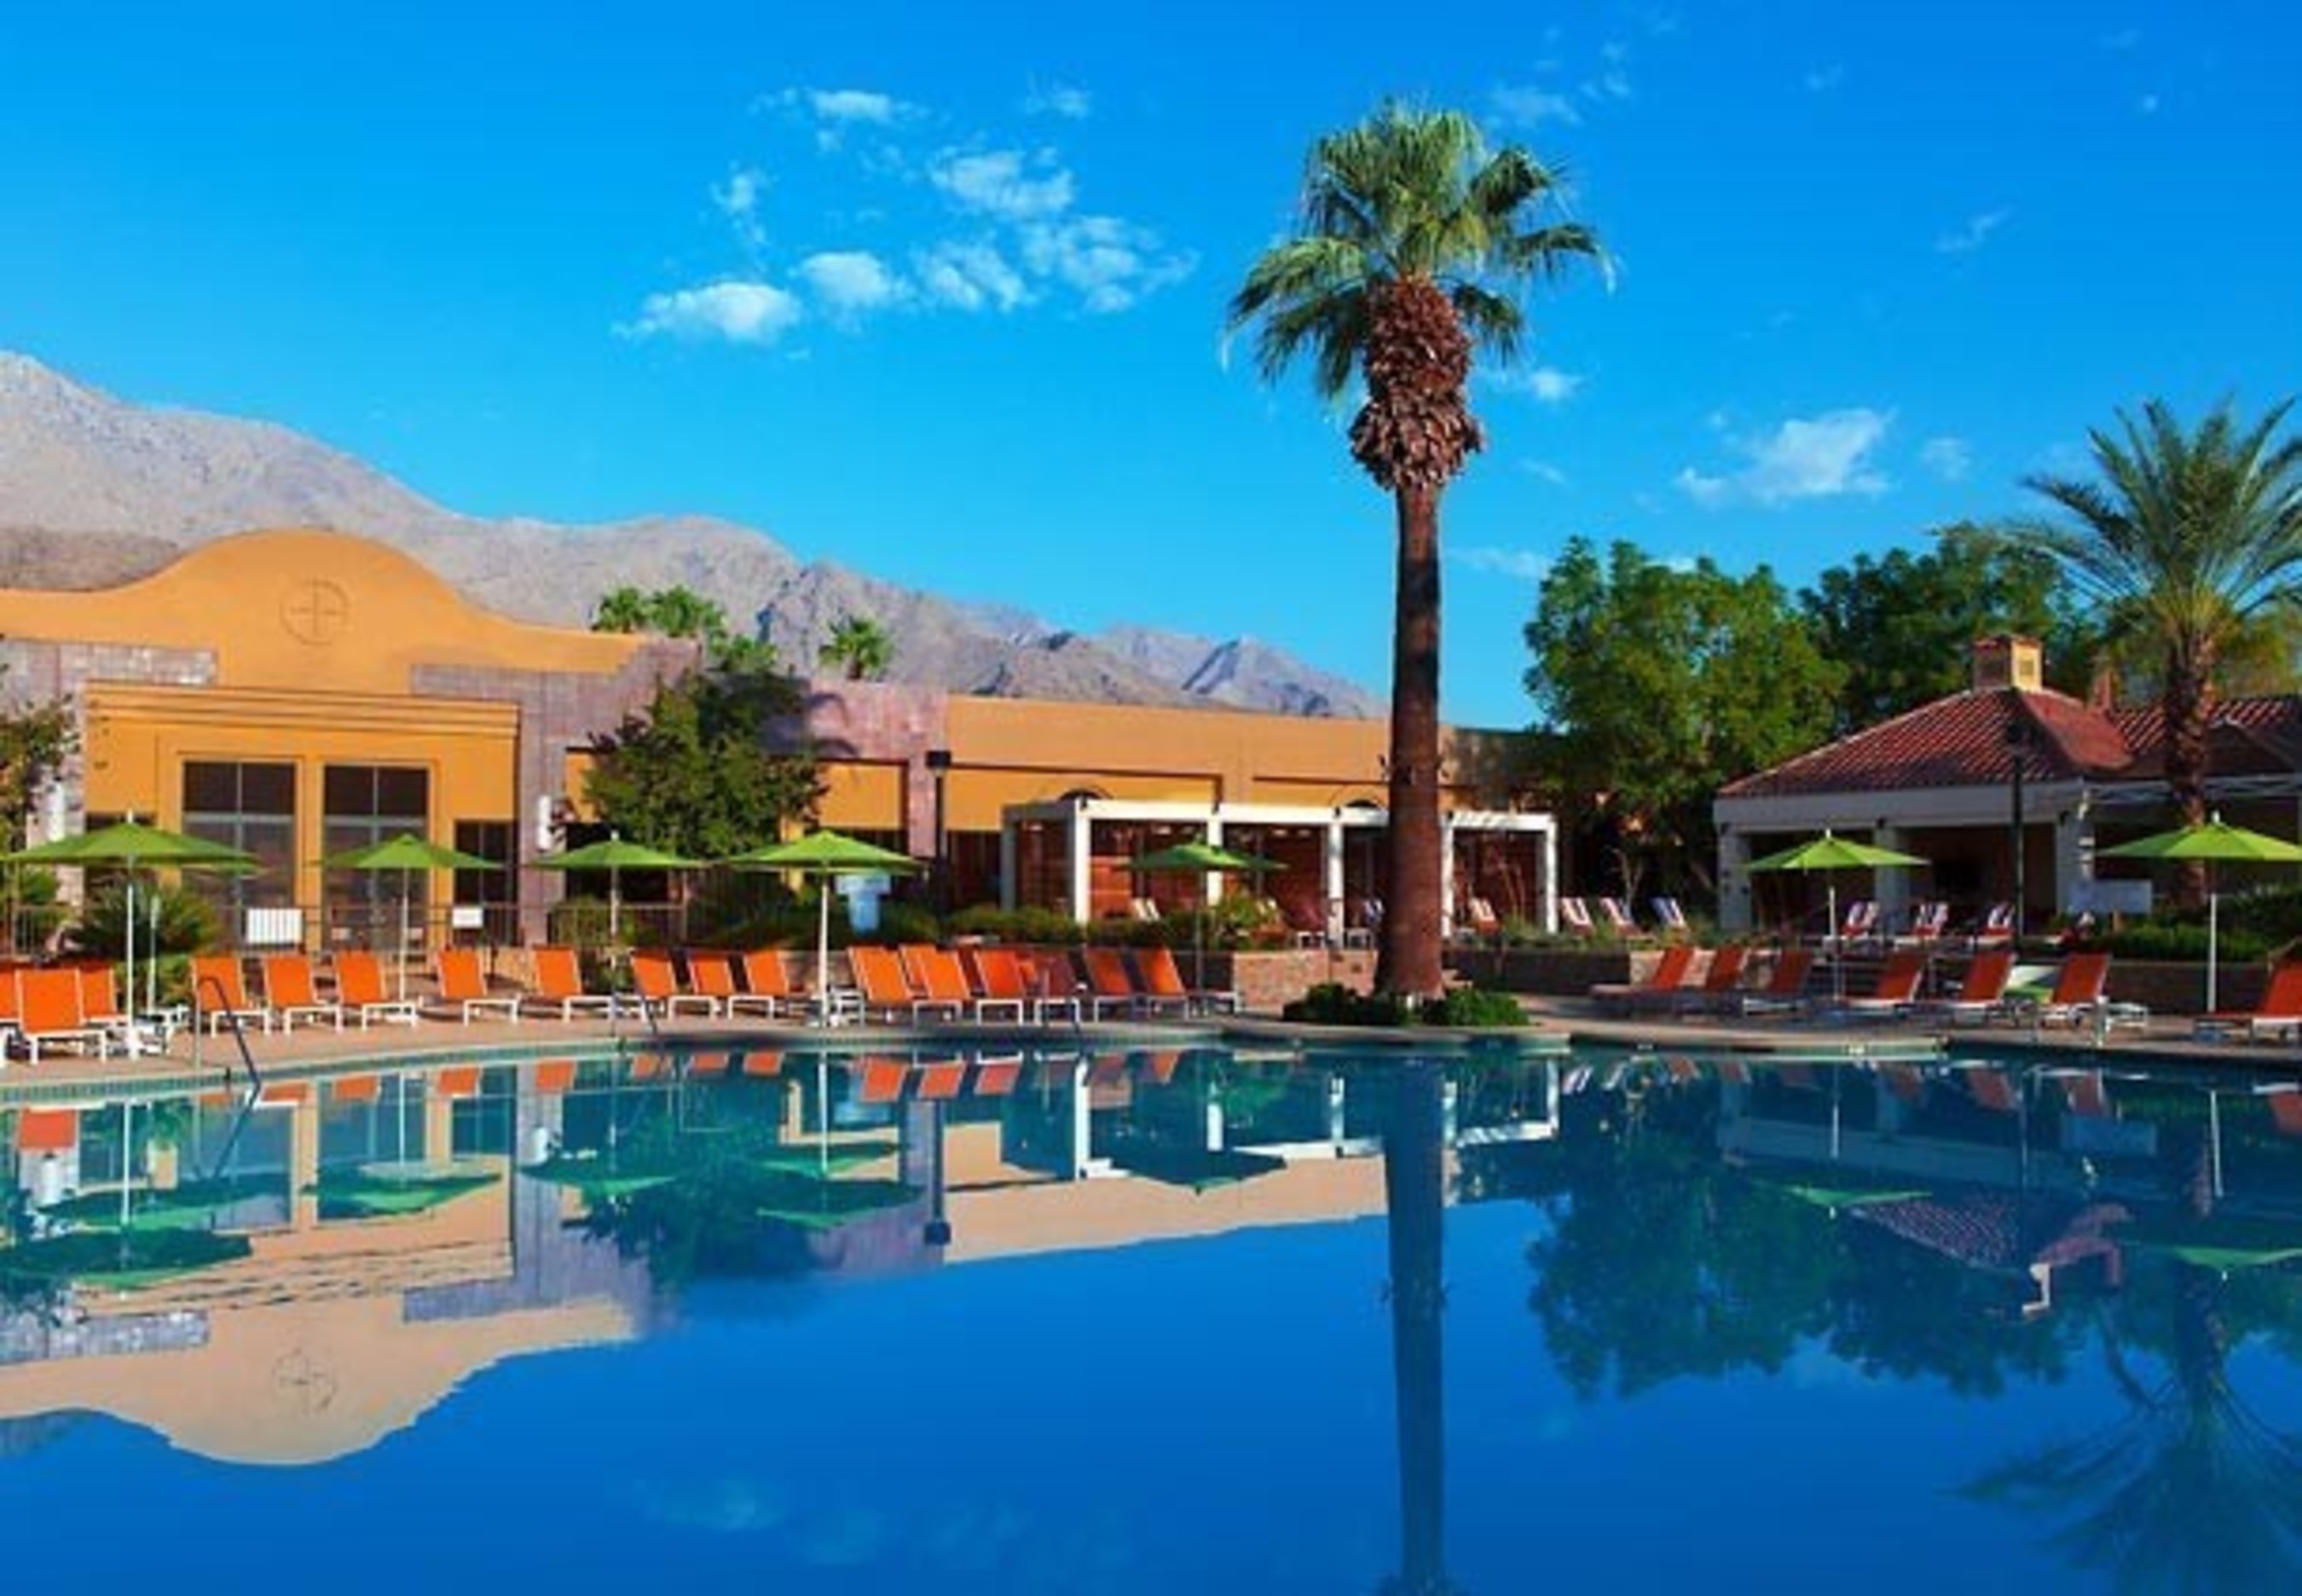 Renaissance Palm Springs Hotel entices summer travelers with the AAA Member Breakfast in Palm Springs Package and the High Altitudes Package. For more information, www.marriott.com/PSPBR or call 1-760-322-6000.